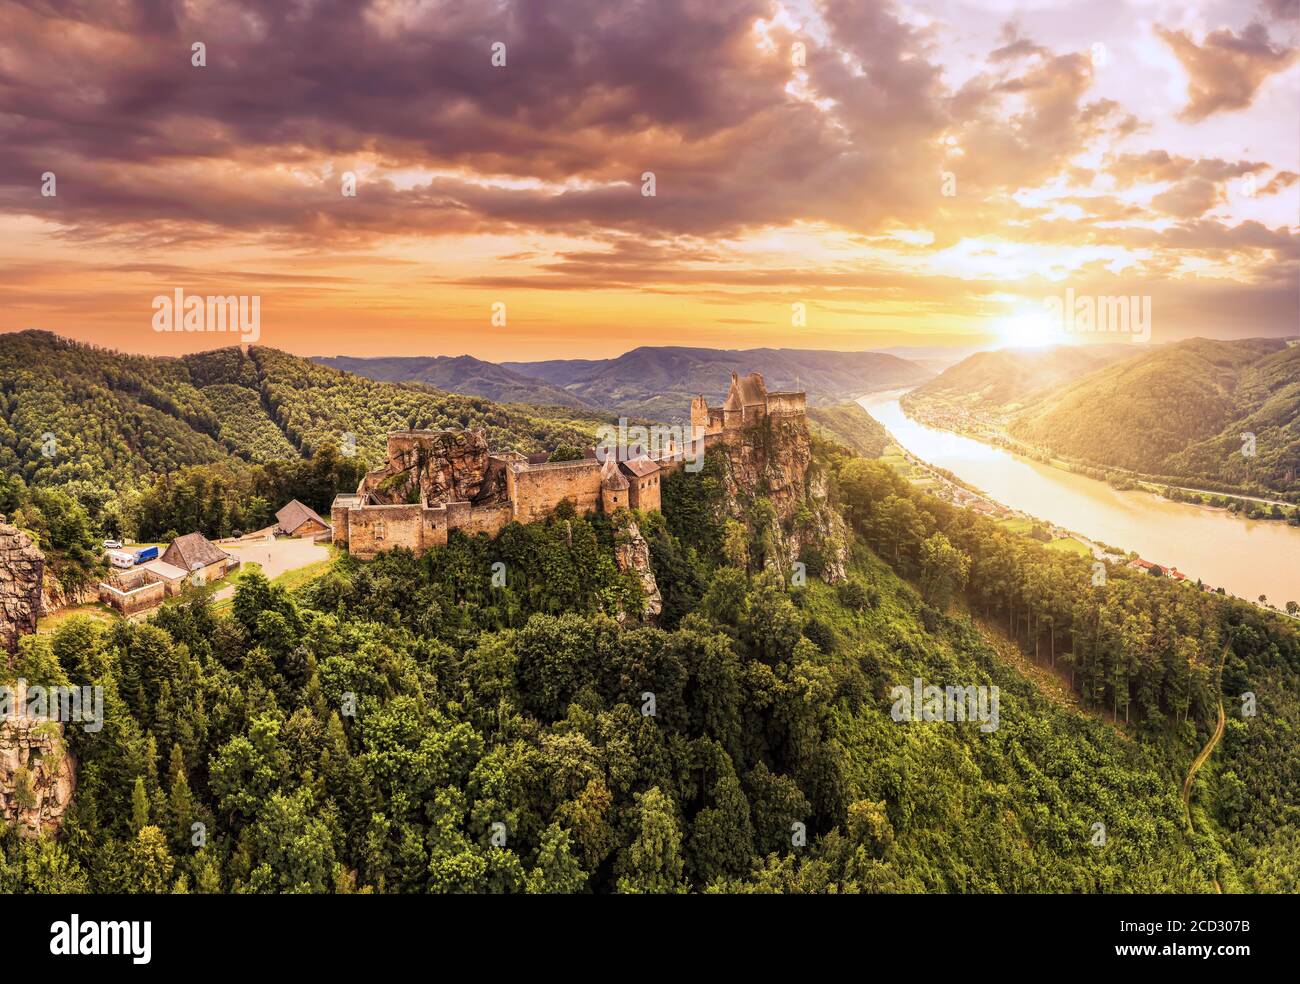 Beautiful landscape with Aggstein castle ruin and Danube river at sunset in Wachau walley Austria. Amazing historical ruins. Original german name is B Stock Photo